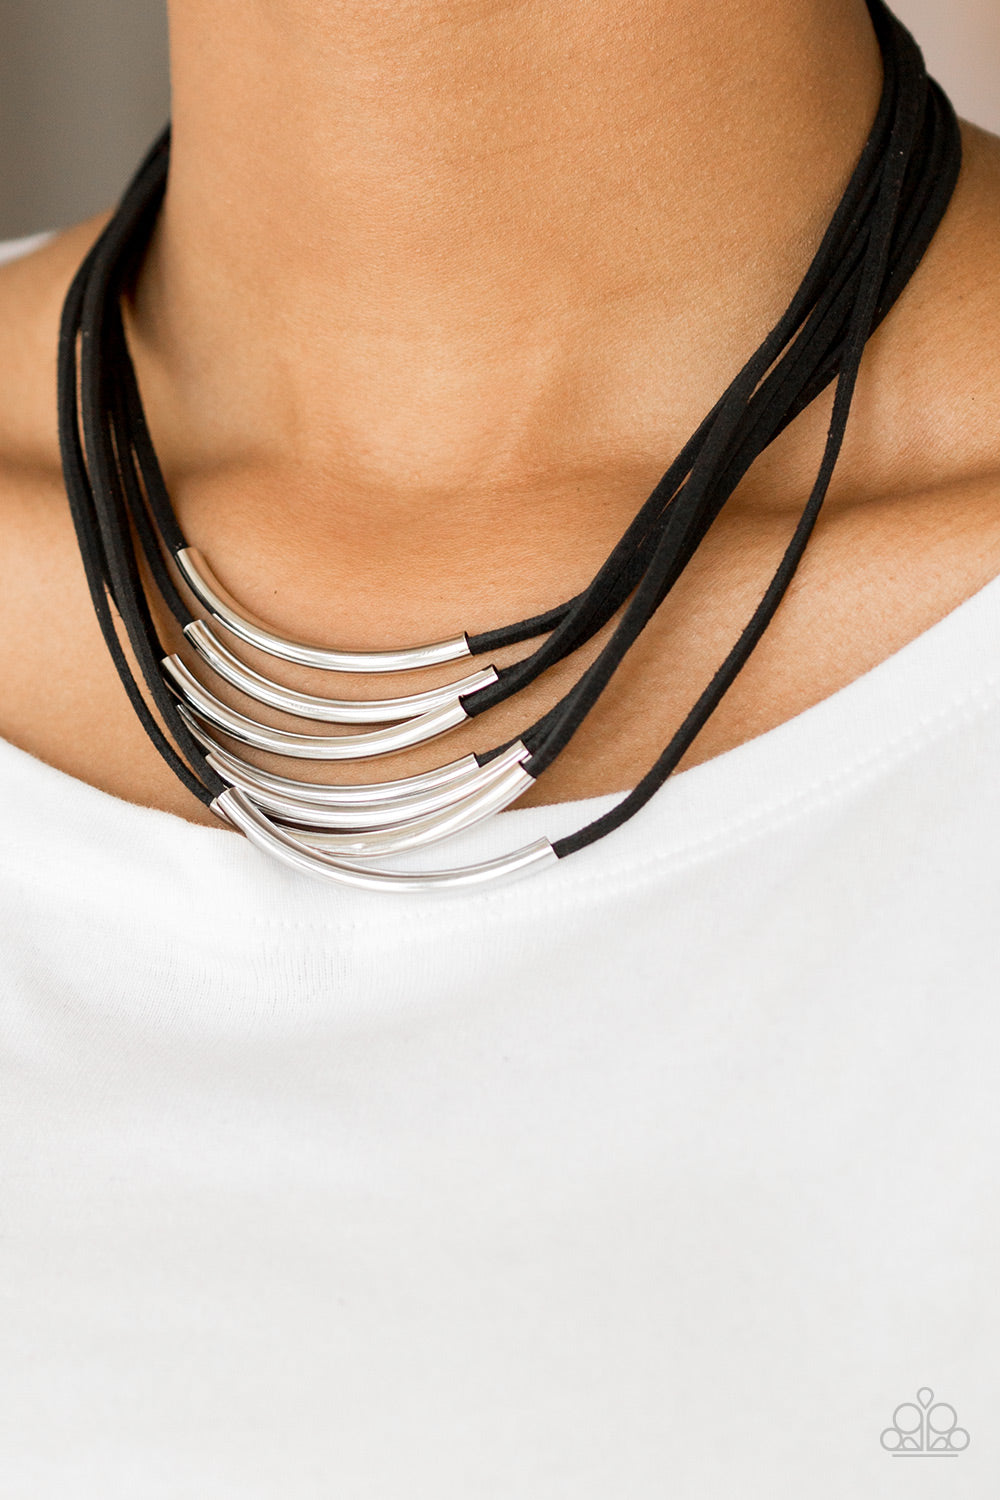 Paparazzi Accessories - Walk The Walkabout - Black Necklace